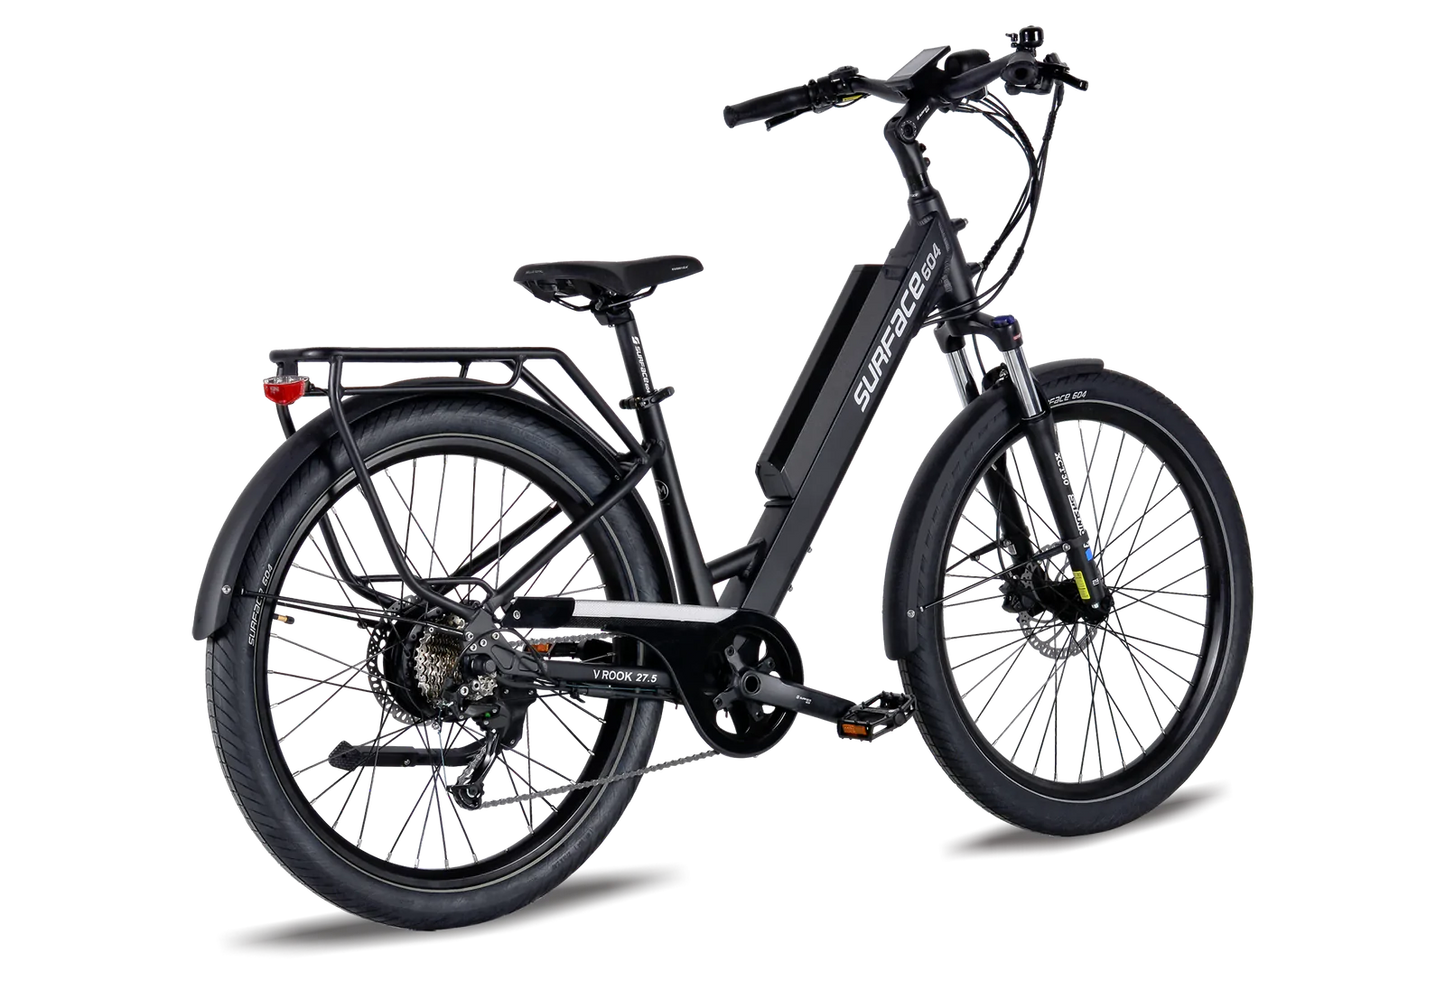 Surface604 Rook Upgraded DEMO eBike